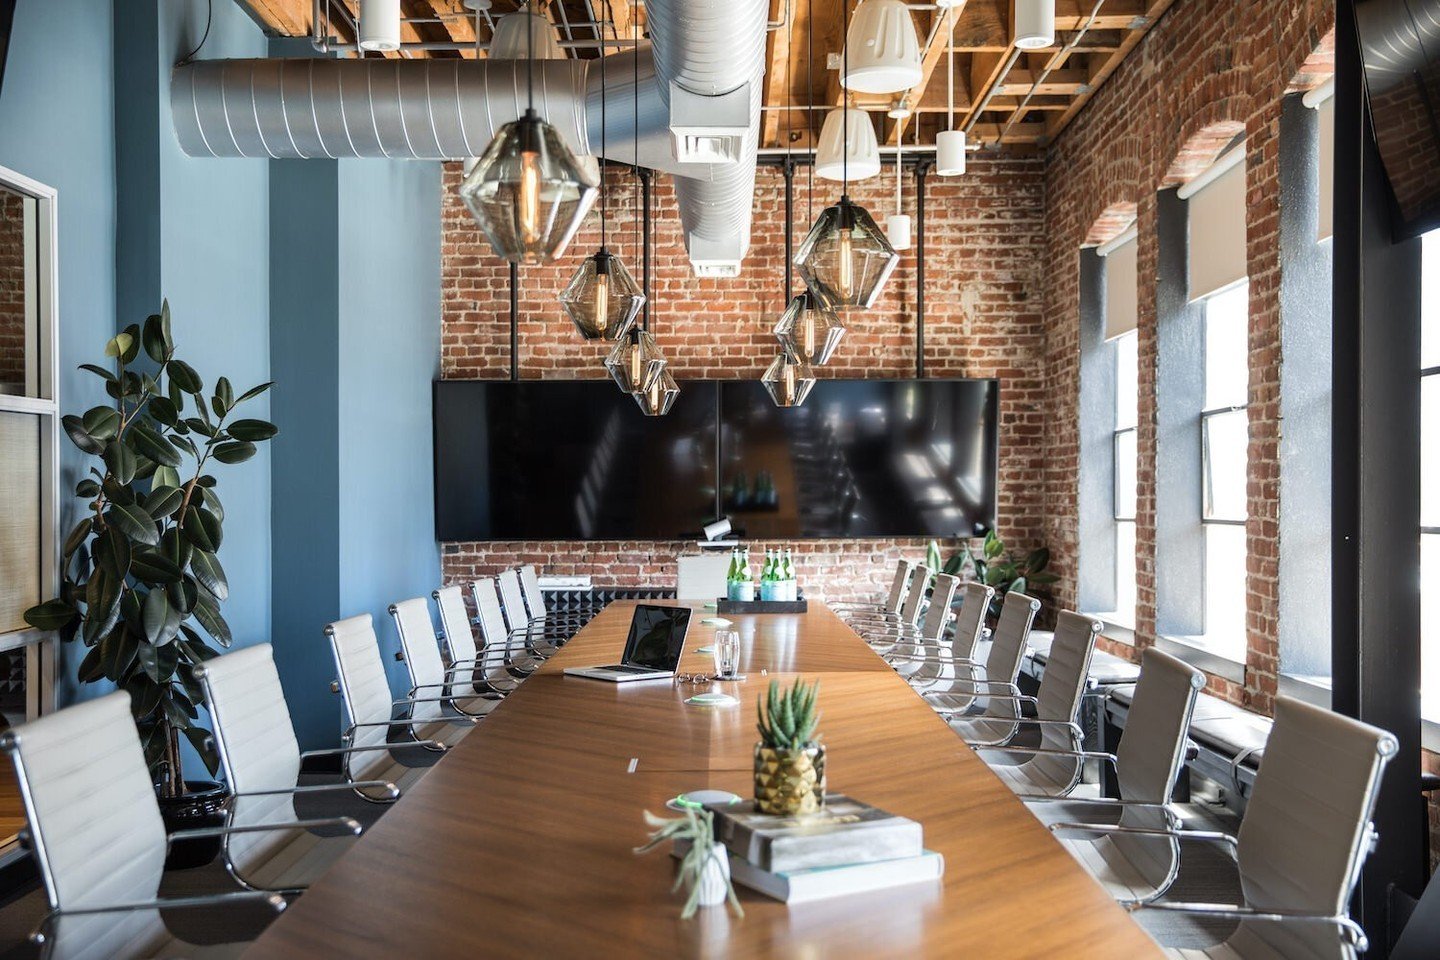 Elevate your company culture -- and your employee's experience -- with energizing and aesthetically on-brand meeting spaces.  Functional is assumed. Innovative design will make your company will stand out from the rest. ⁠
⁠
📸: @kuohphotographyinteri